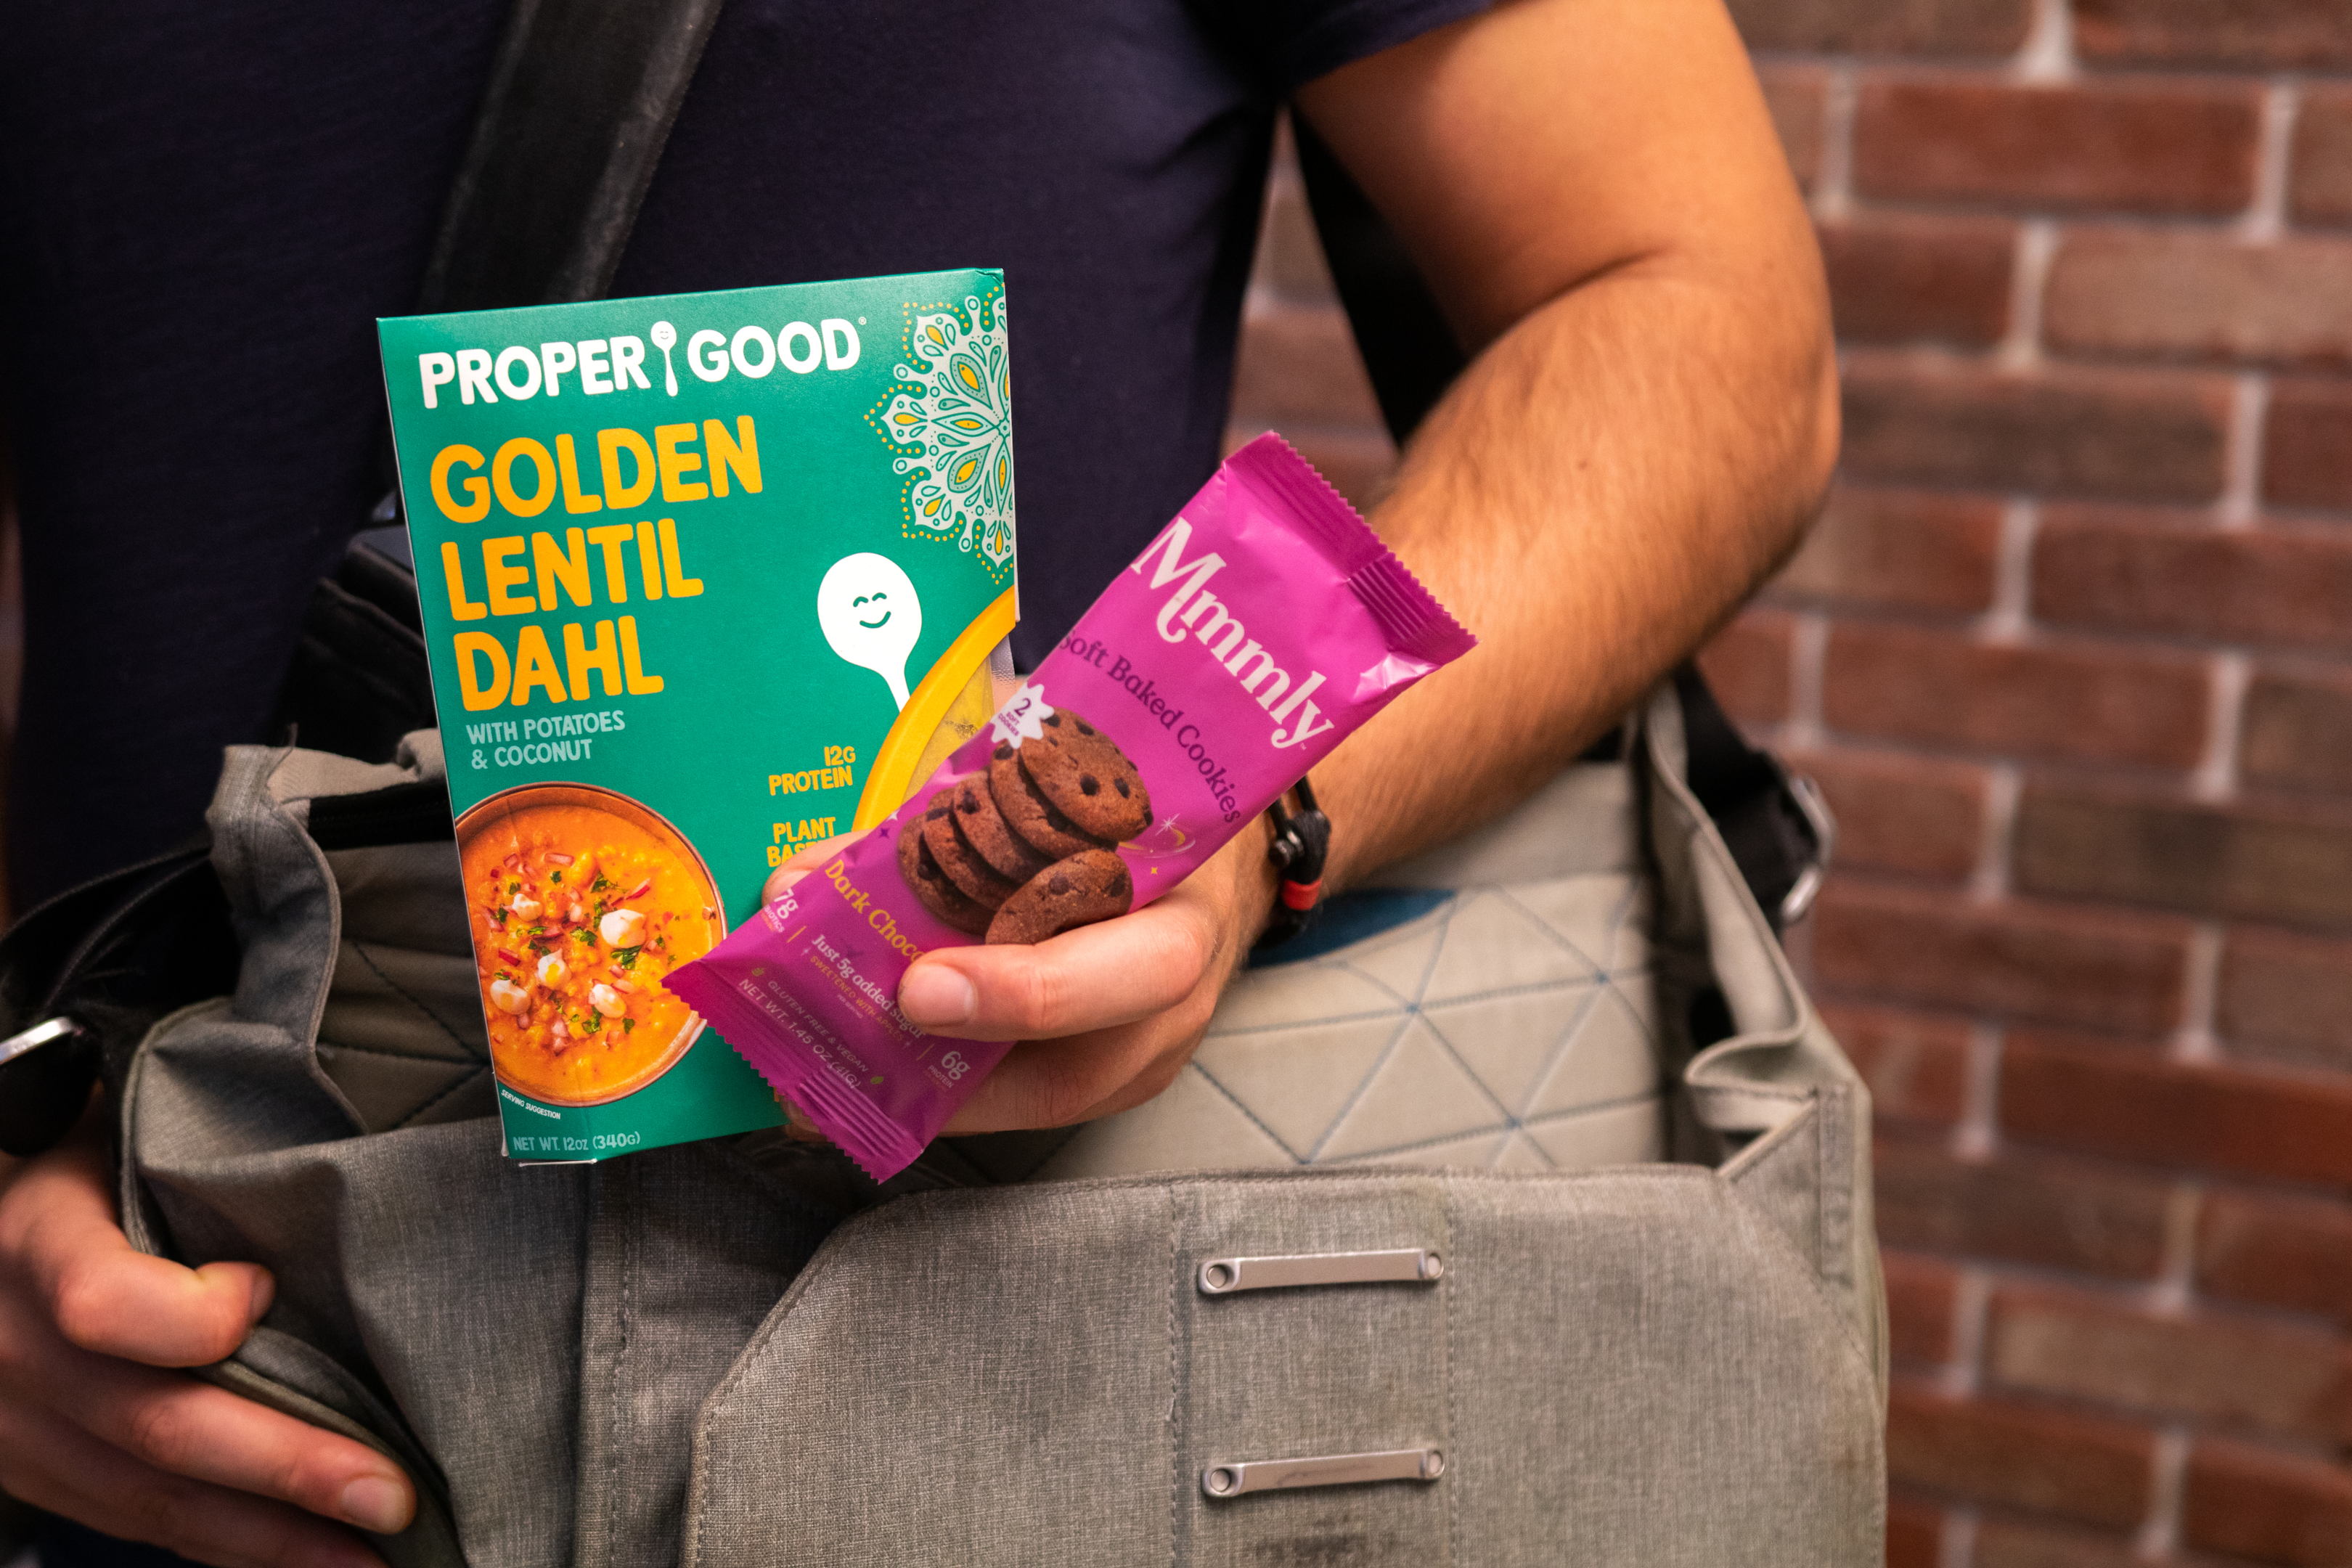 A person carrying Proper Good's Golden Lentil Dahl and Mmmly Cookies for a nutritious lunch